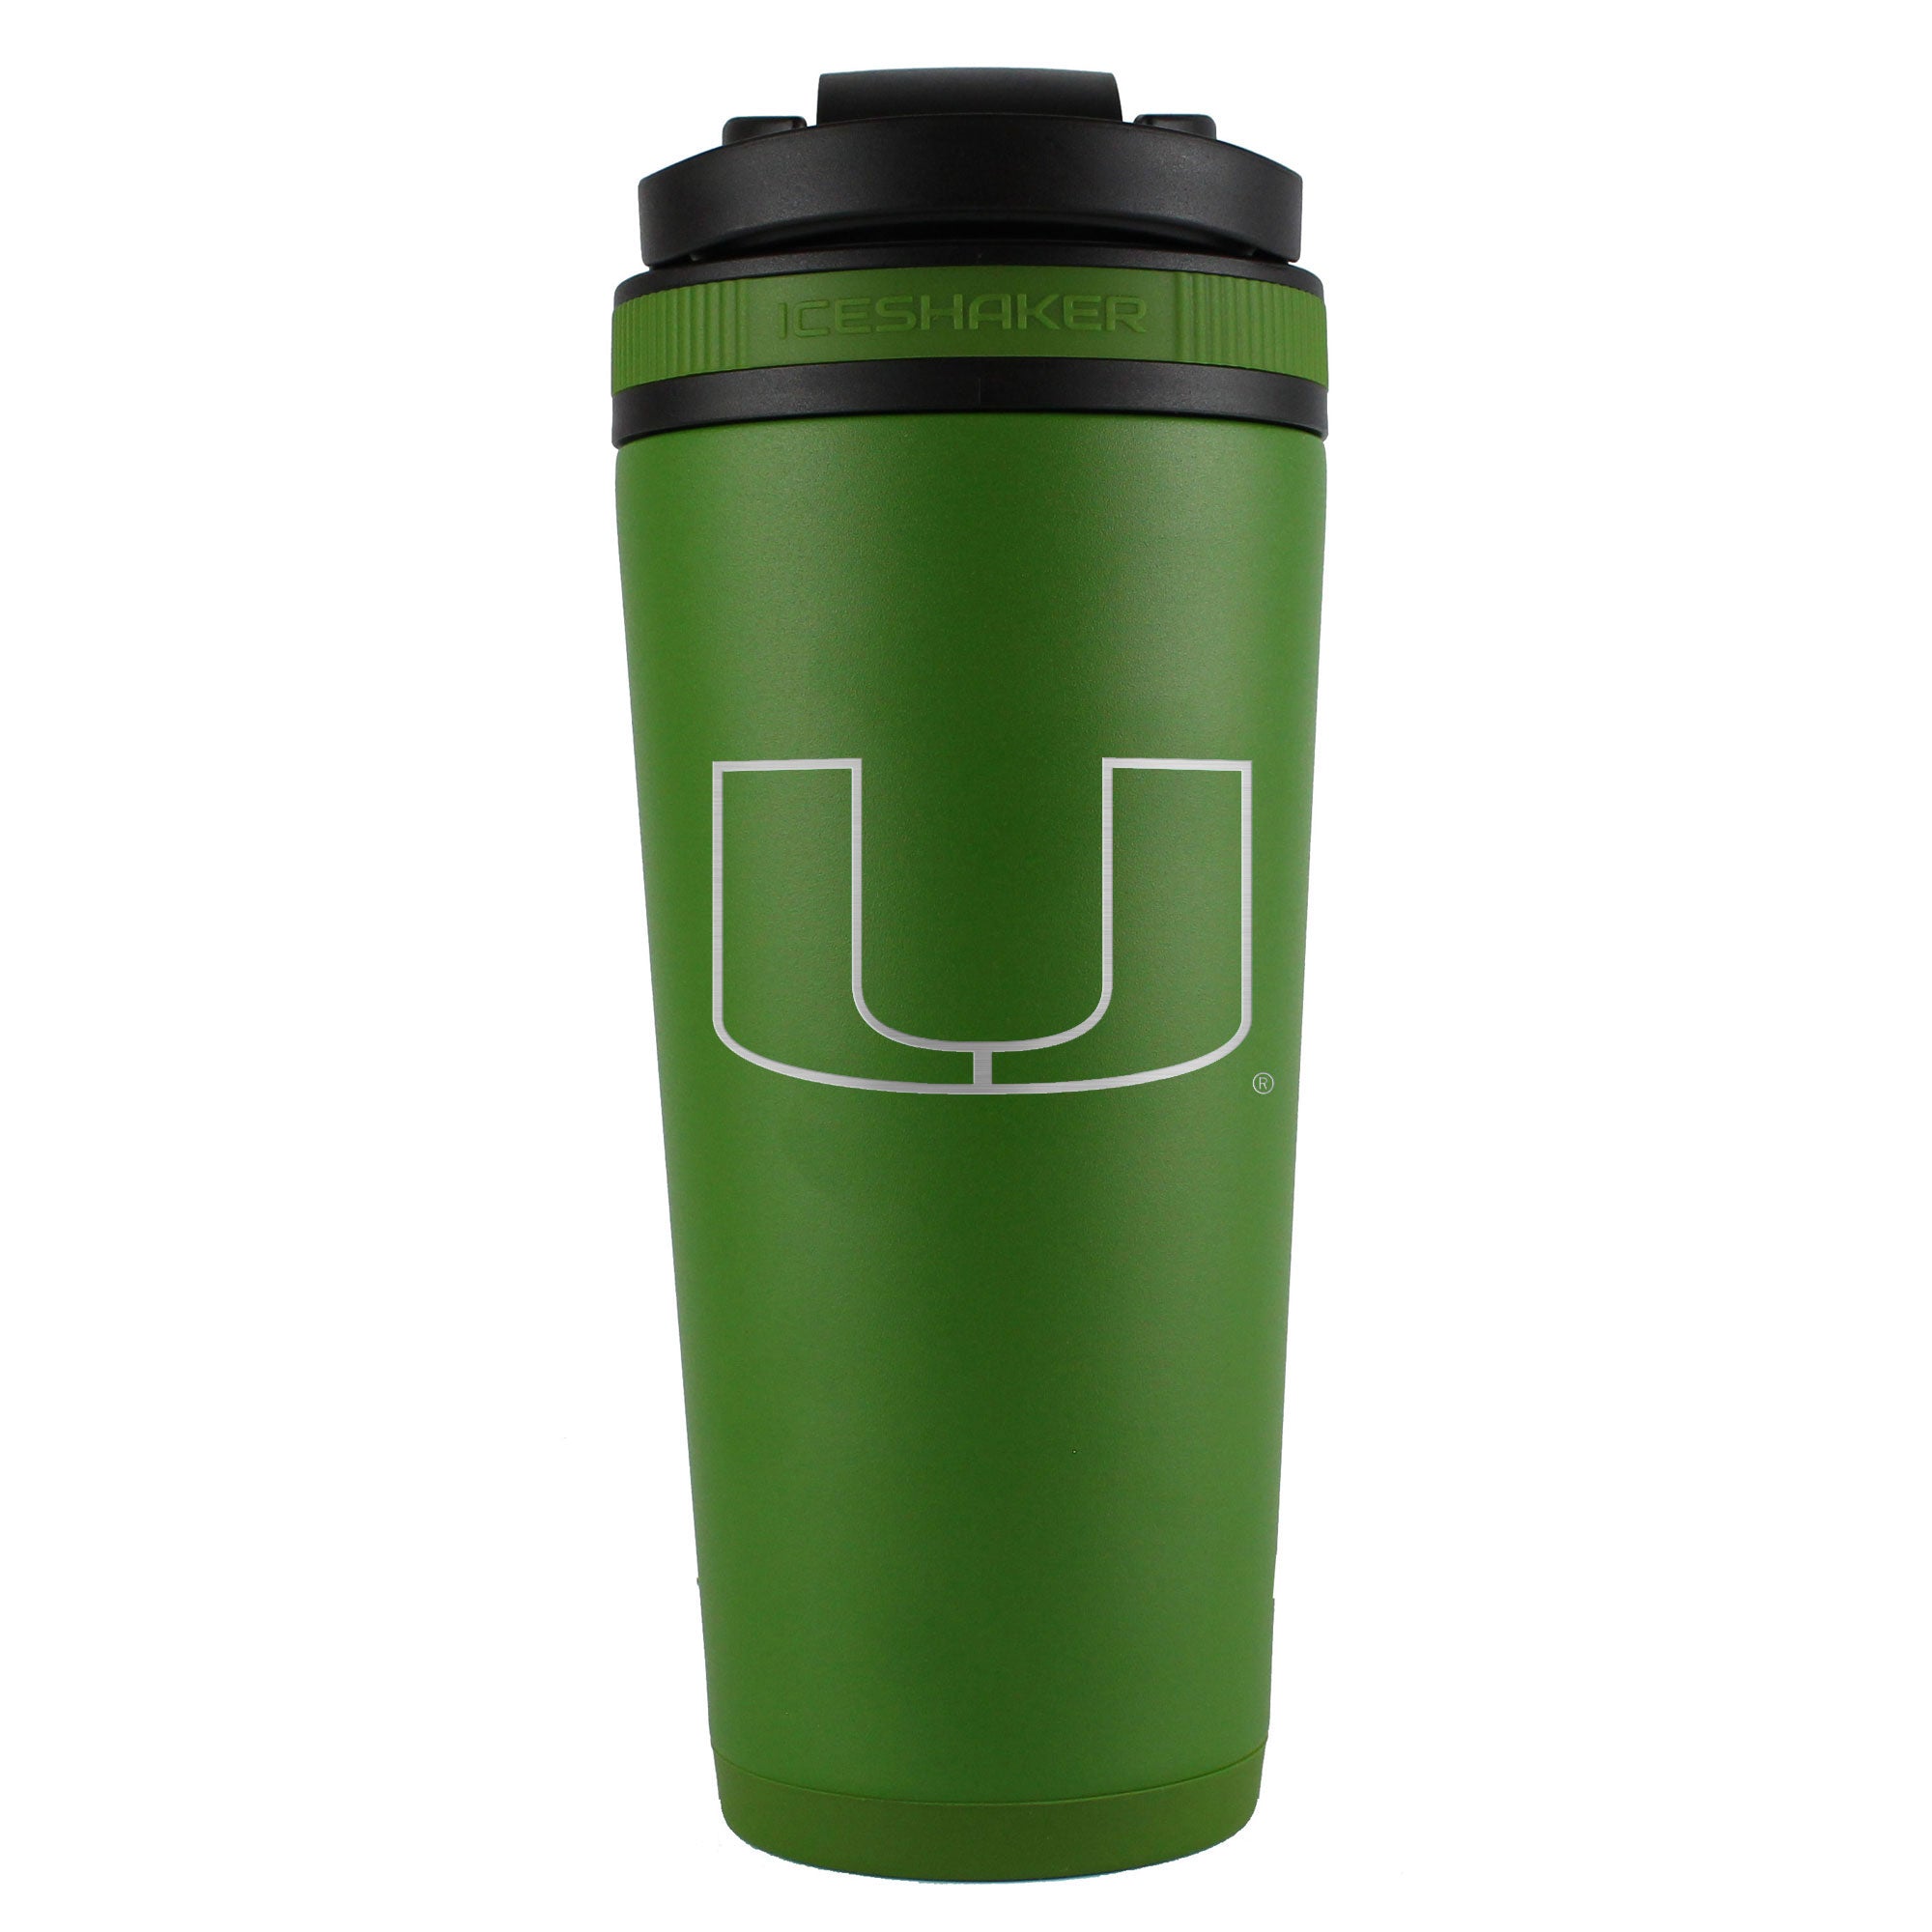 Officially Licensed University of Miami 26oz Ice Shaker